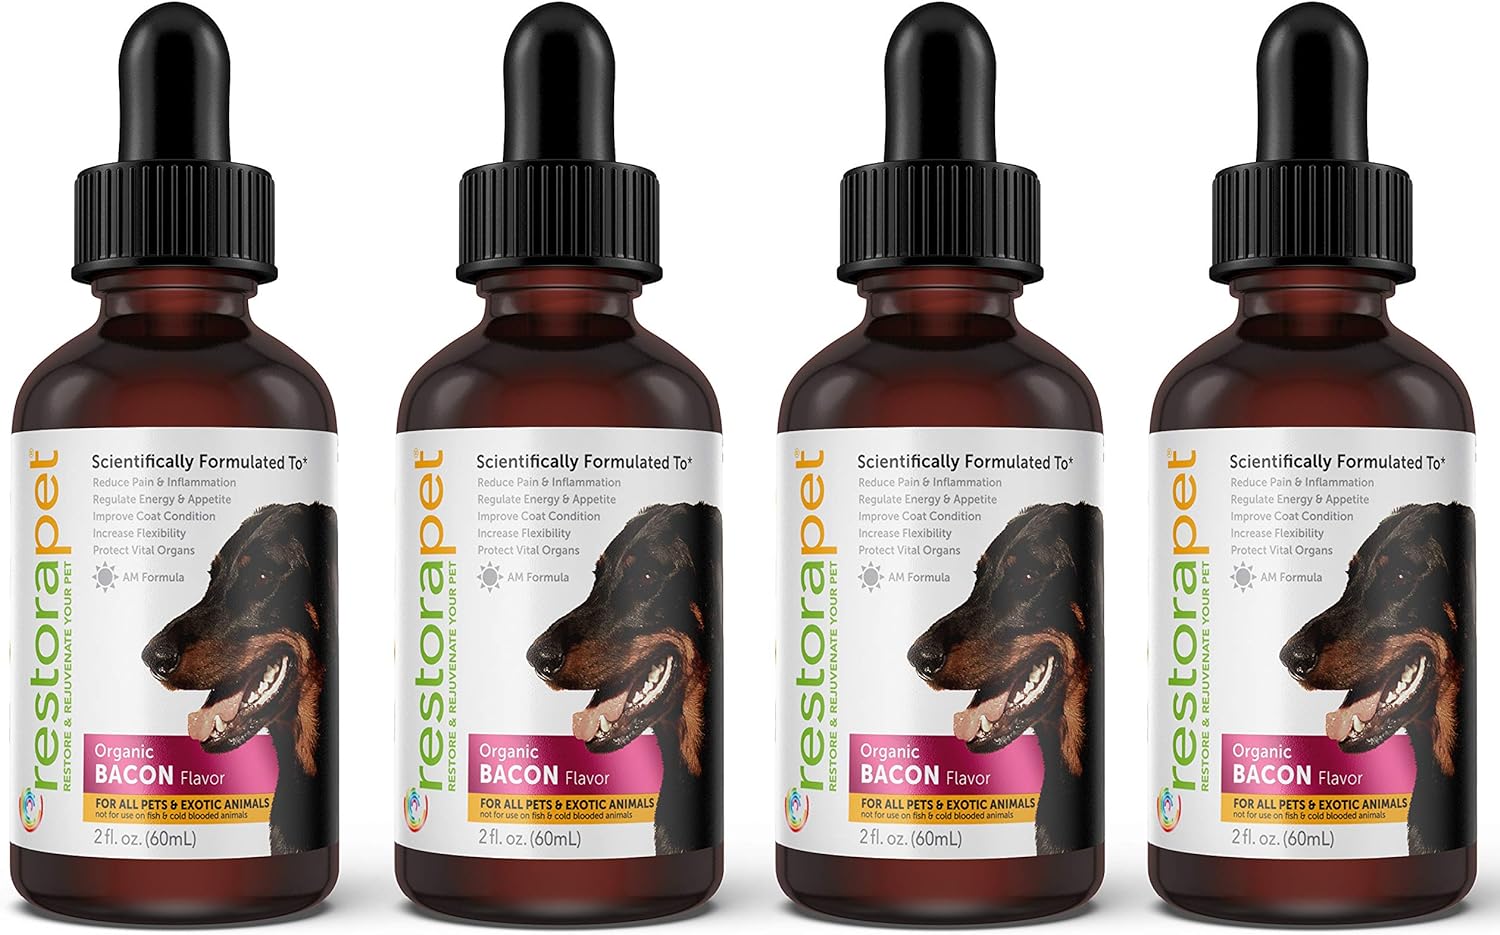 RestoraPet 4-Pack Dog & Cat Bacon Liquid Multivitamin | Dog Arthritis Pain Relief | Hip & Joint Vitamins for Dogs - Anti Inflammatory Supplement for Dogs & Cats | Organic & Non-GMO, Vet Approved